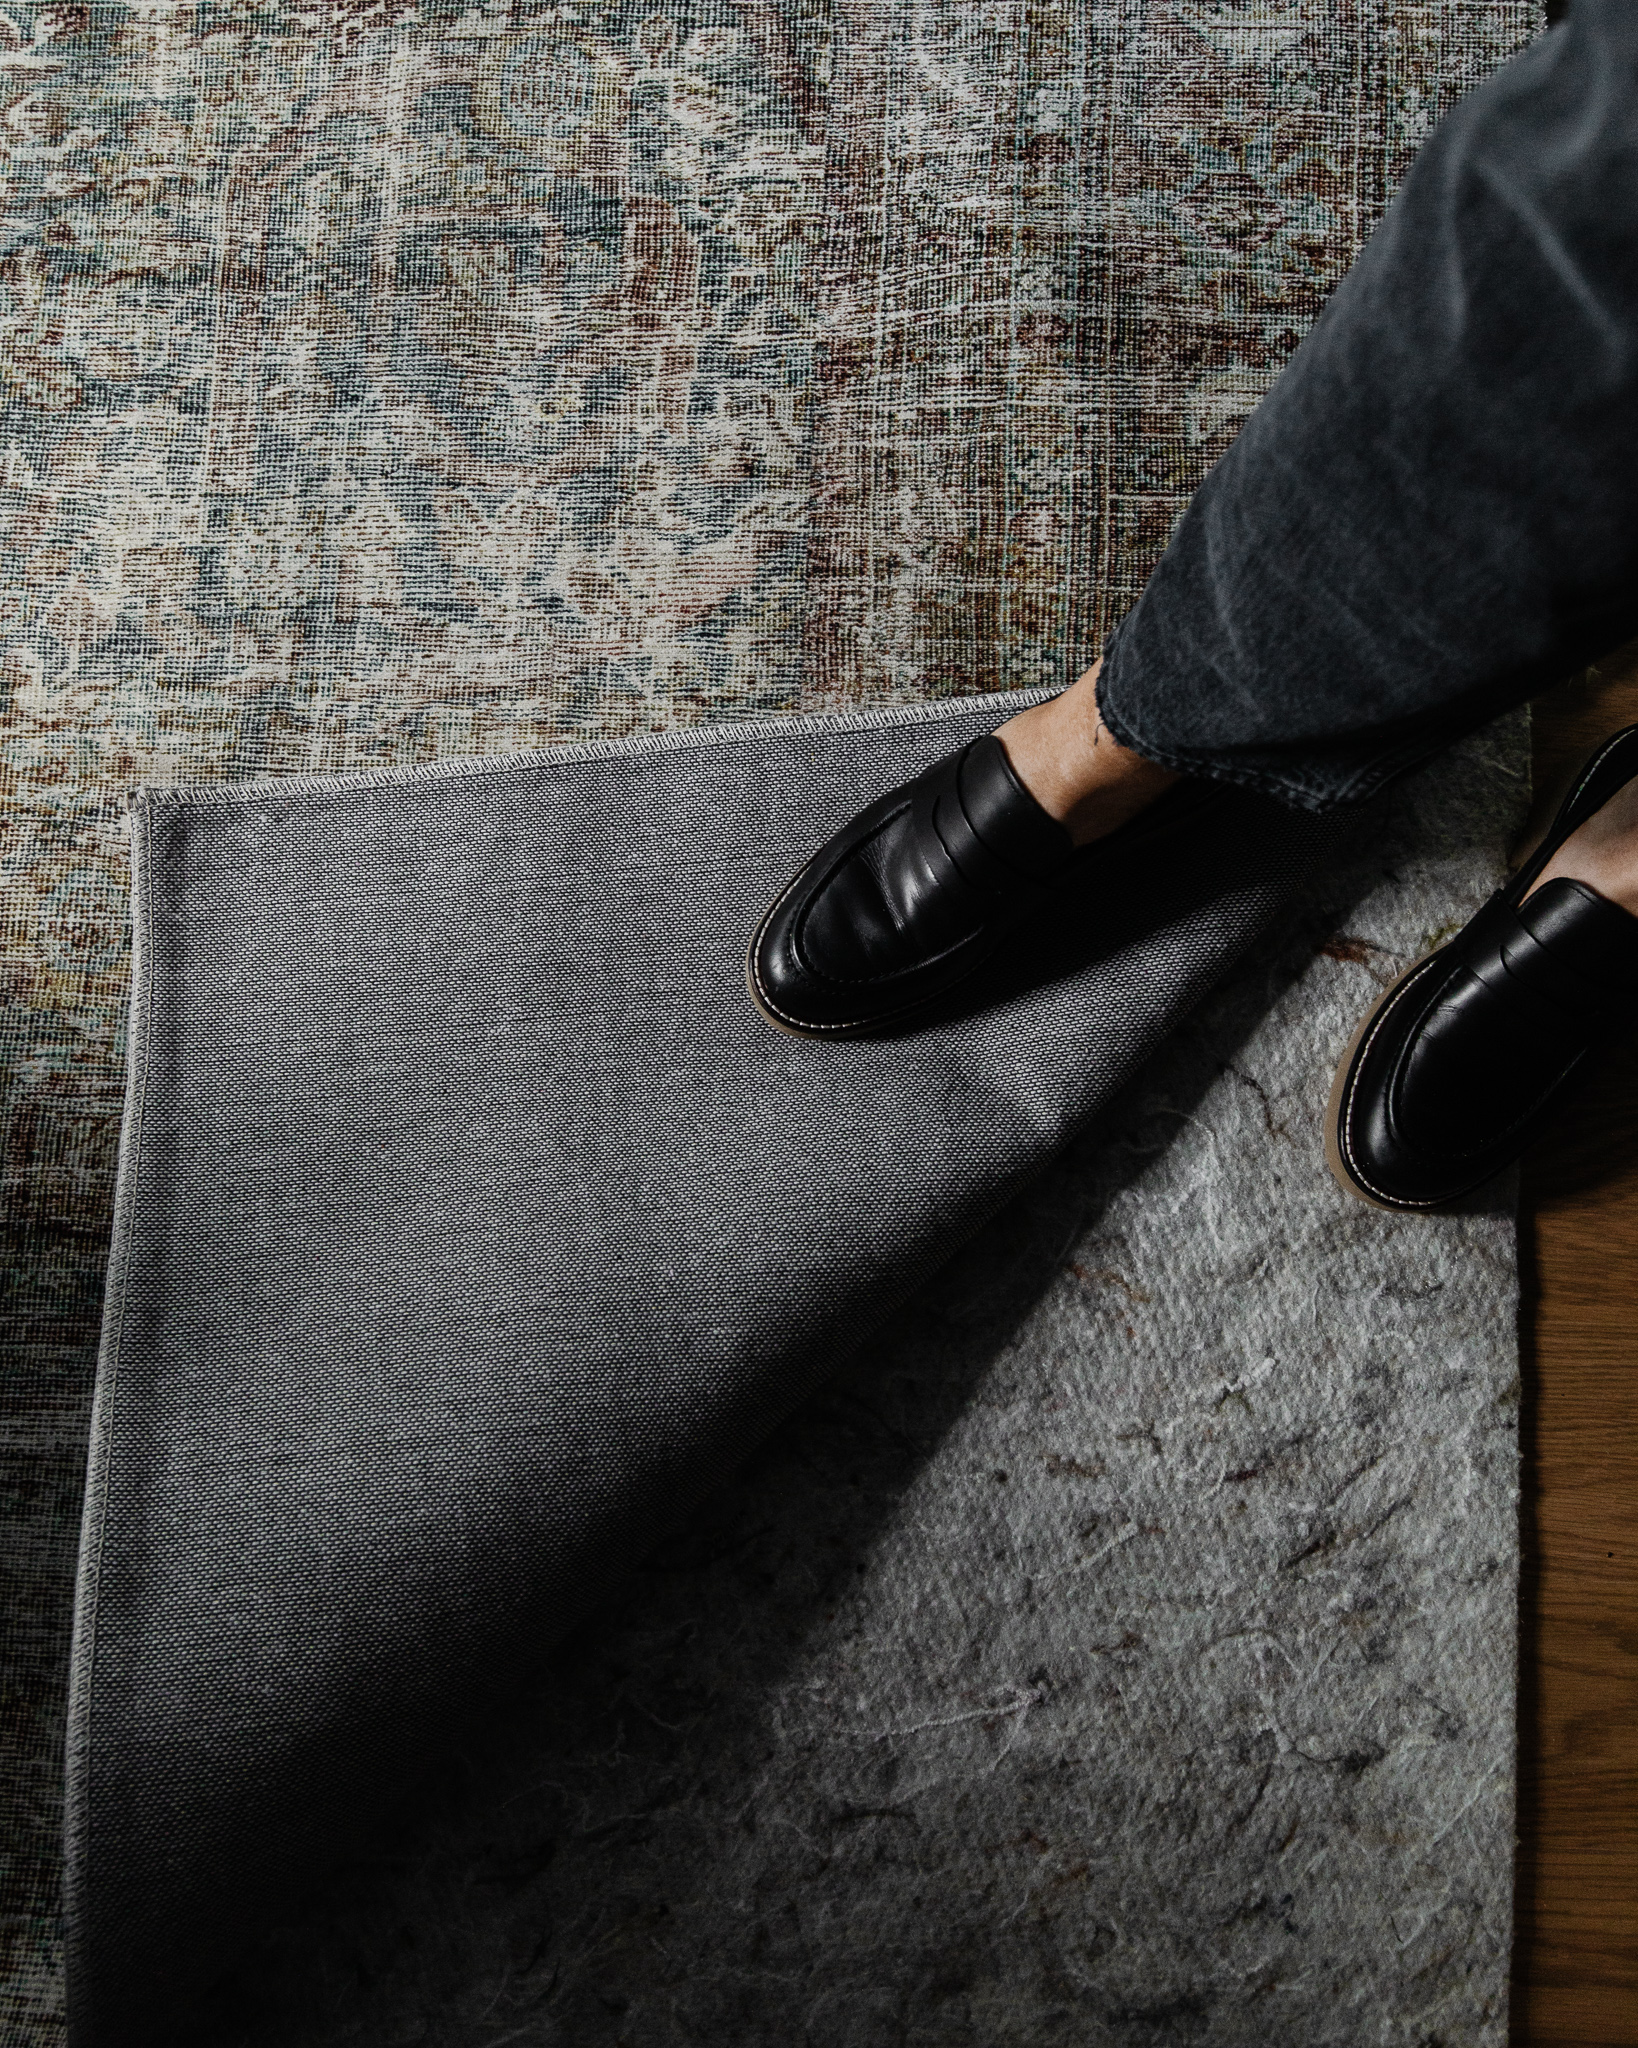 The 7 Best Rug Pads of 2023 - PureWow